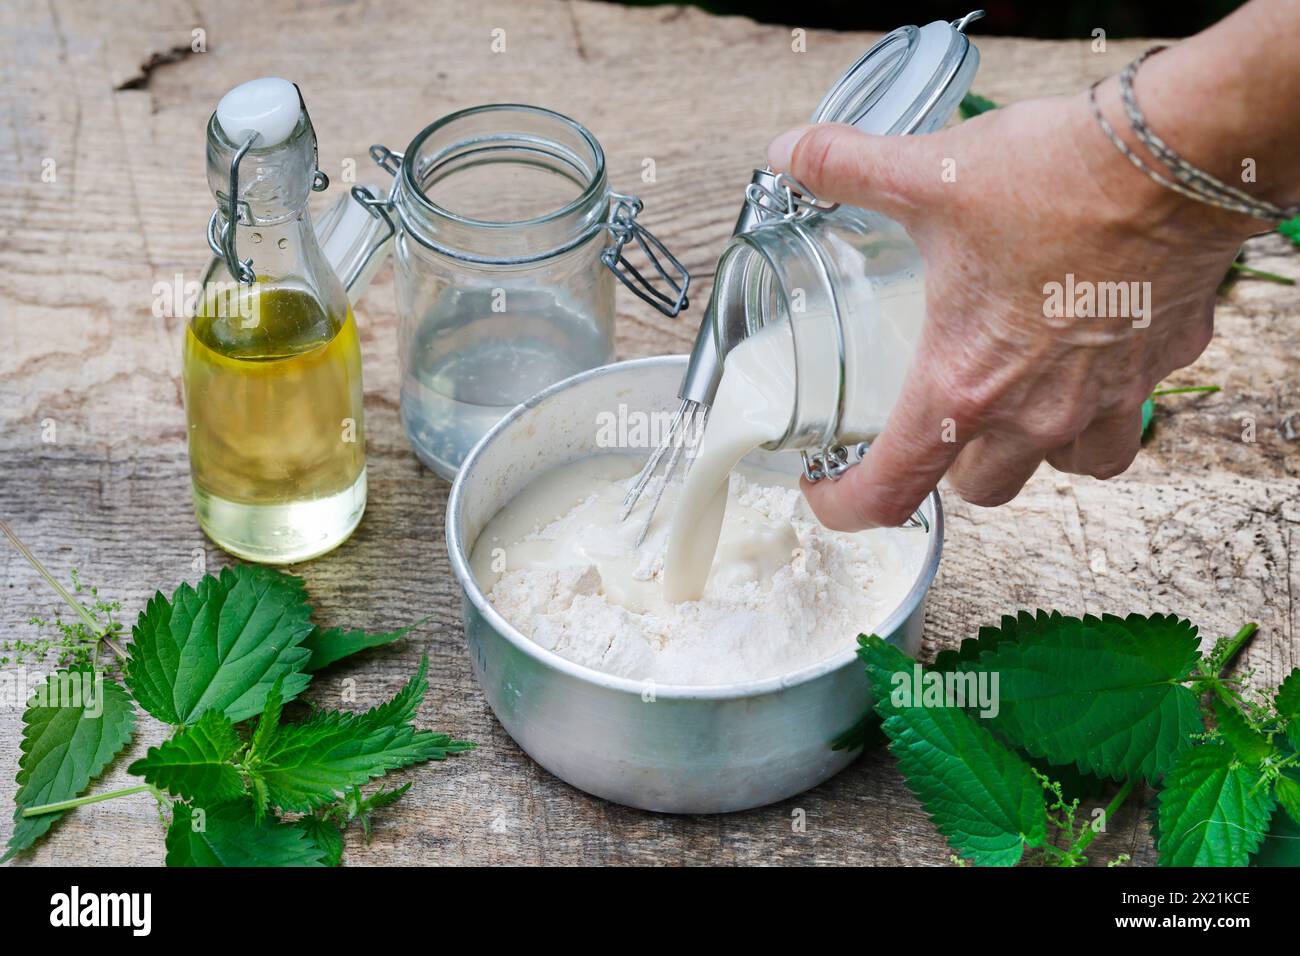 Making vegan plant-based potato chips with nettle leaves, step 2: Pancake batter being prepared, series image 2/5 Stock Photo